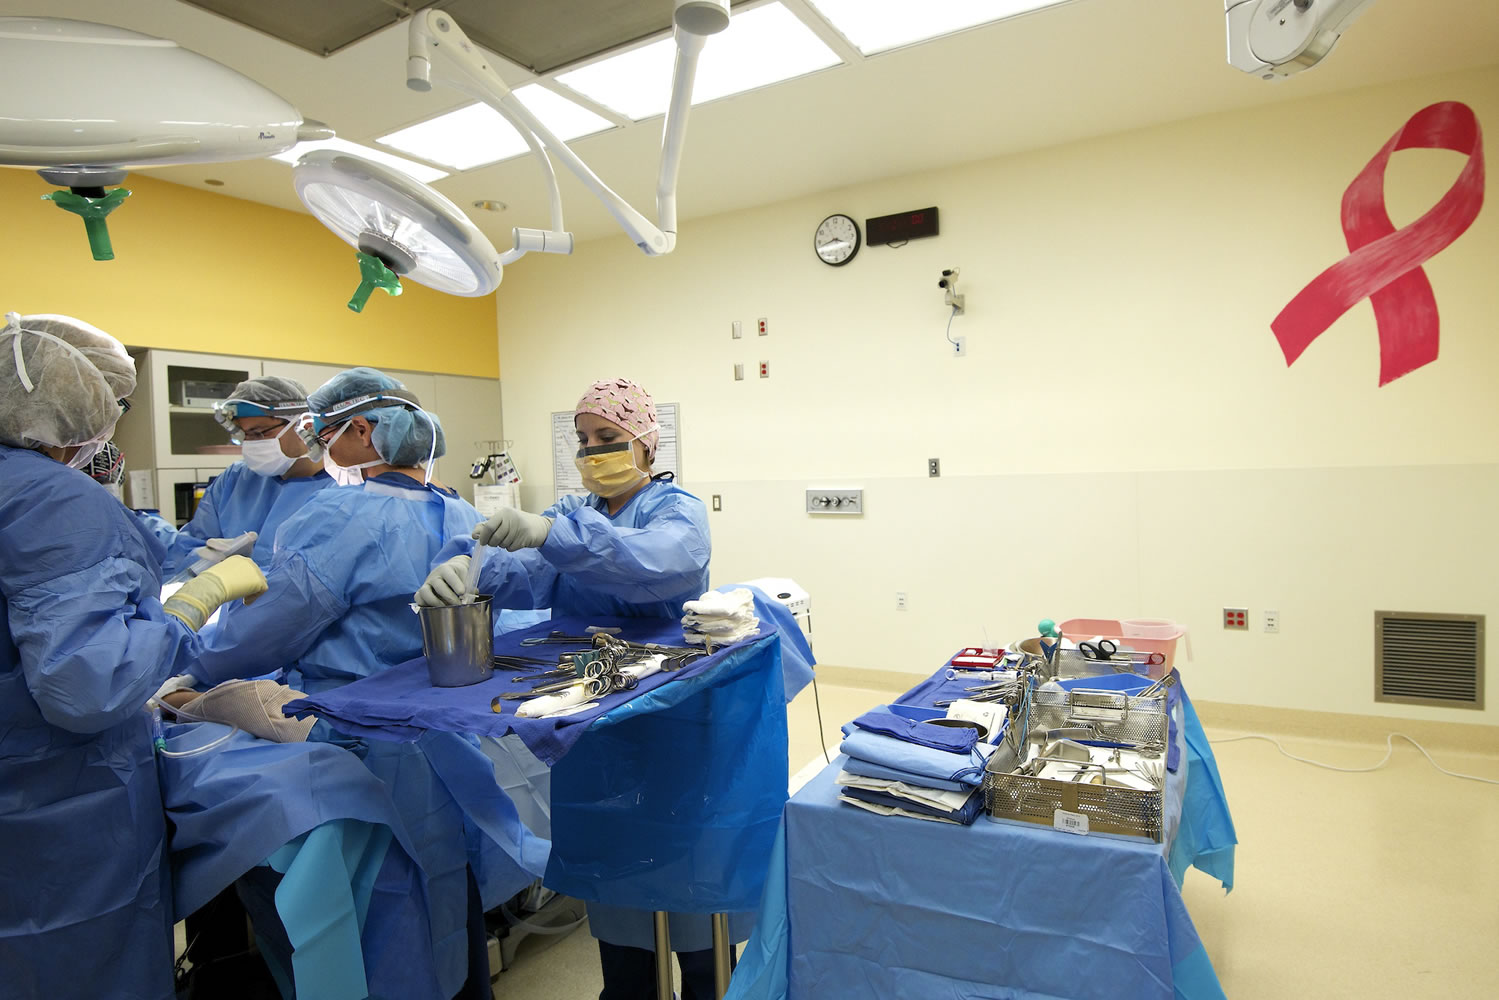 Dr. Toni Storm-Dickerson, second from right, and colleagues perform a bilateral nipple-sparing mastectomy at PeaceHealth Southwest Medical Center in Vancouver.